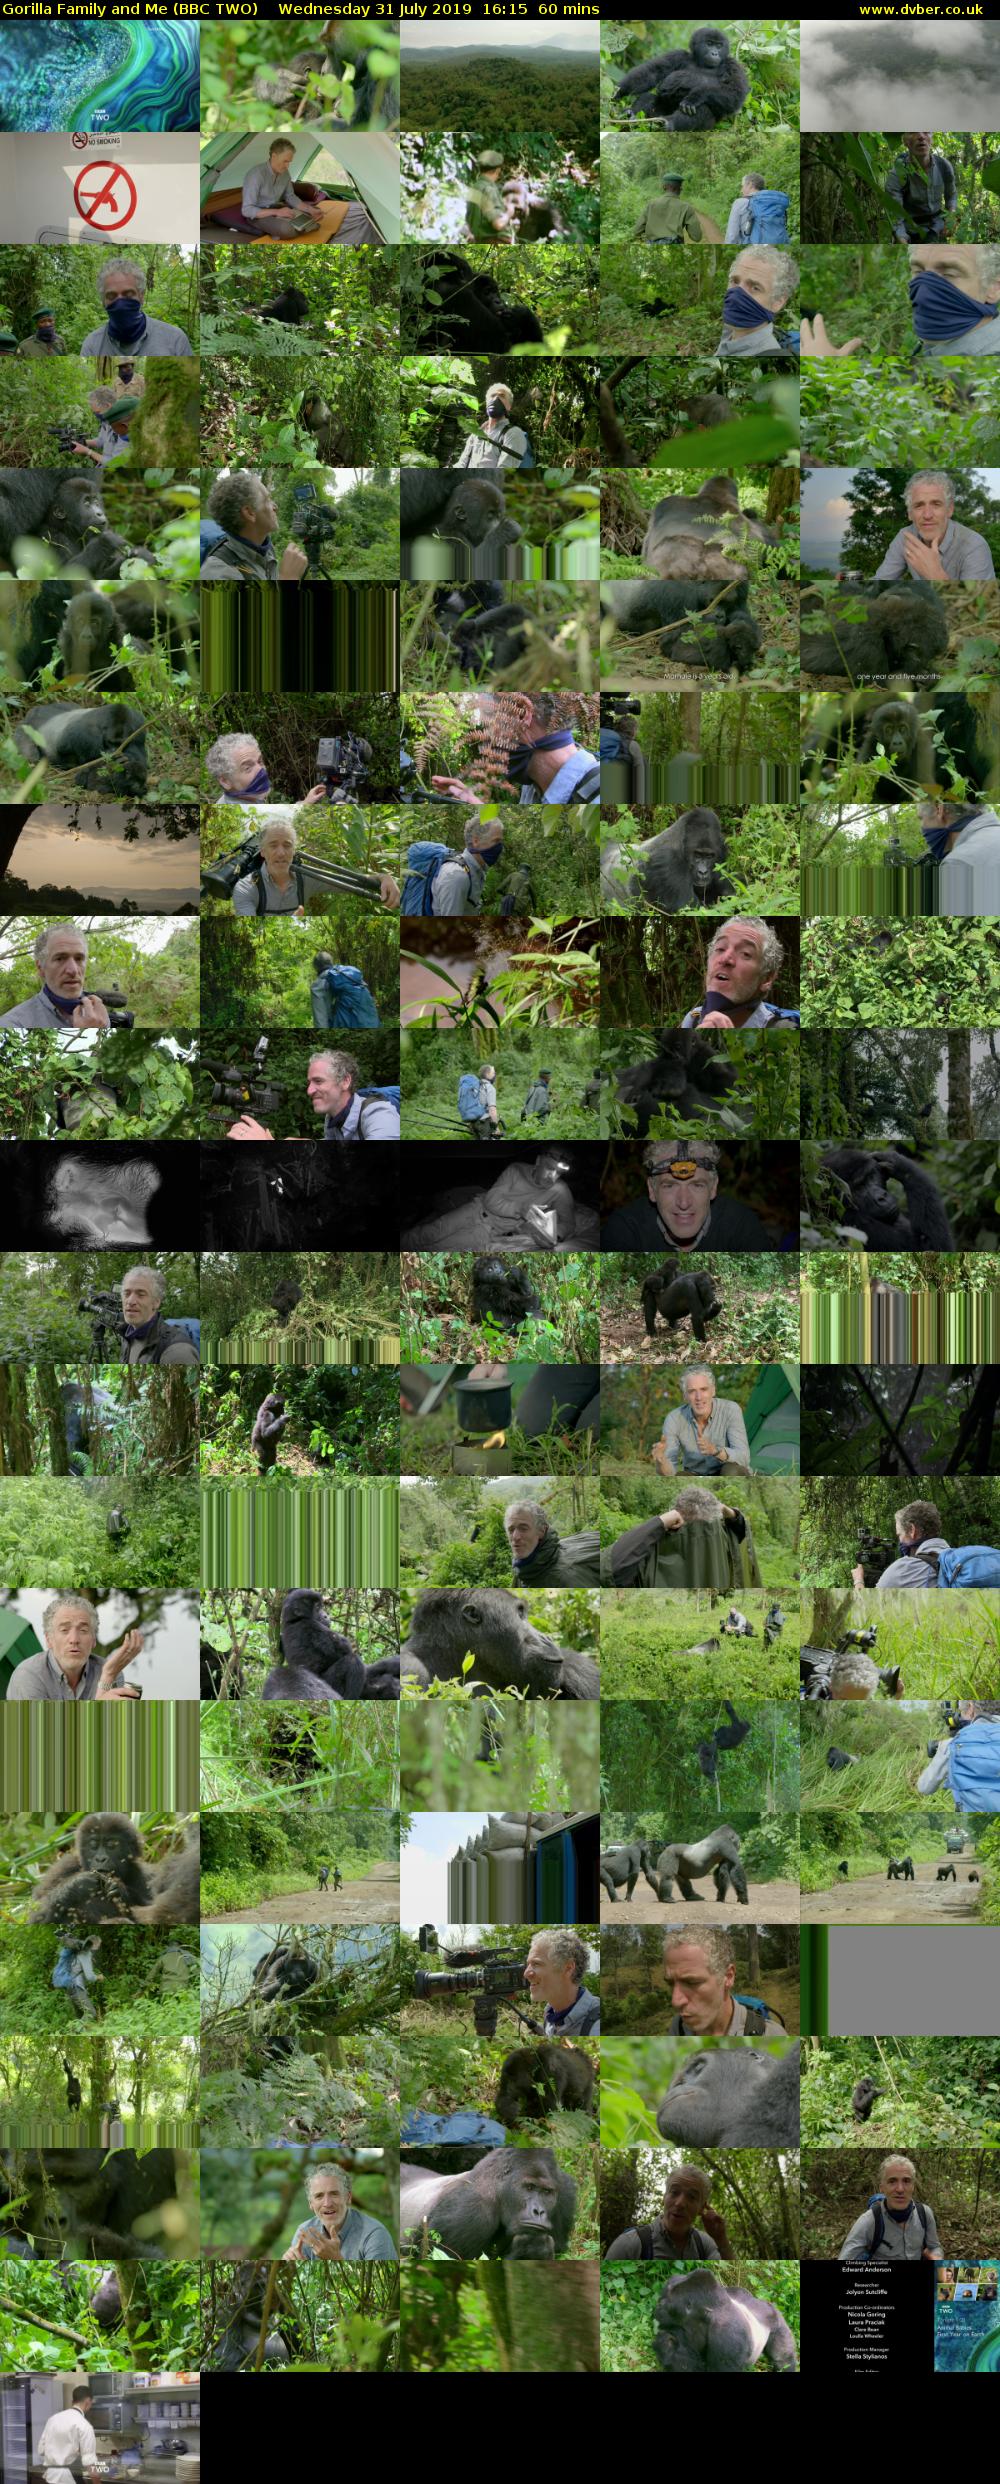 Gorilla Family and Me (BBC TWO) Wednesday 31 July 2019 16:15 - 17:15